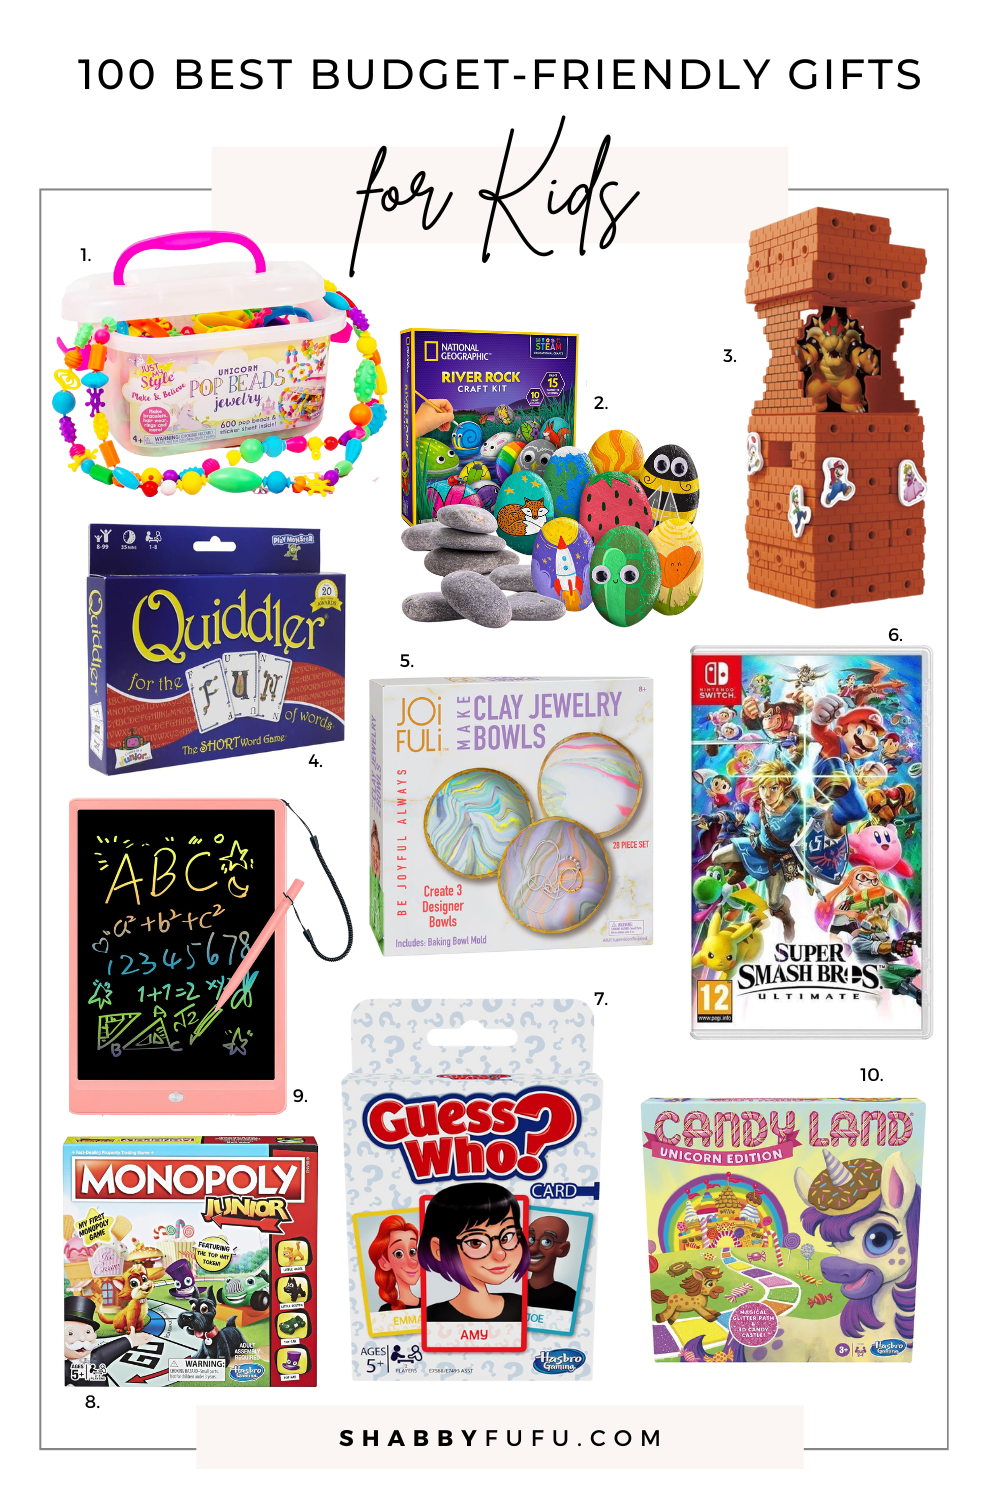 Collage image featuring different products titled "100 Best Budget Friendly Holiday Gifts For Kids"